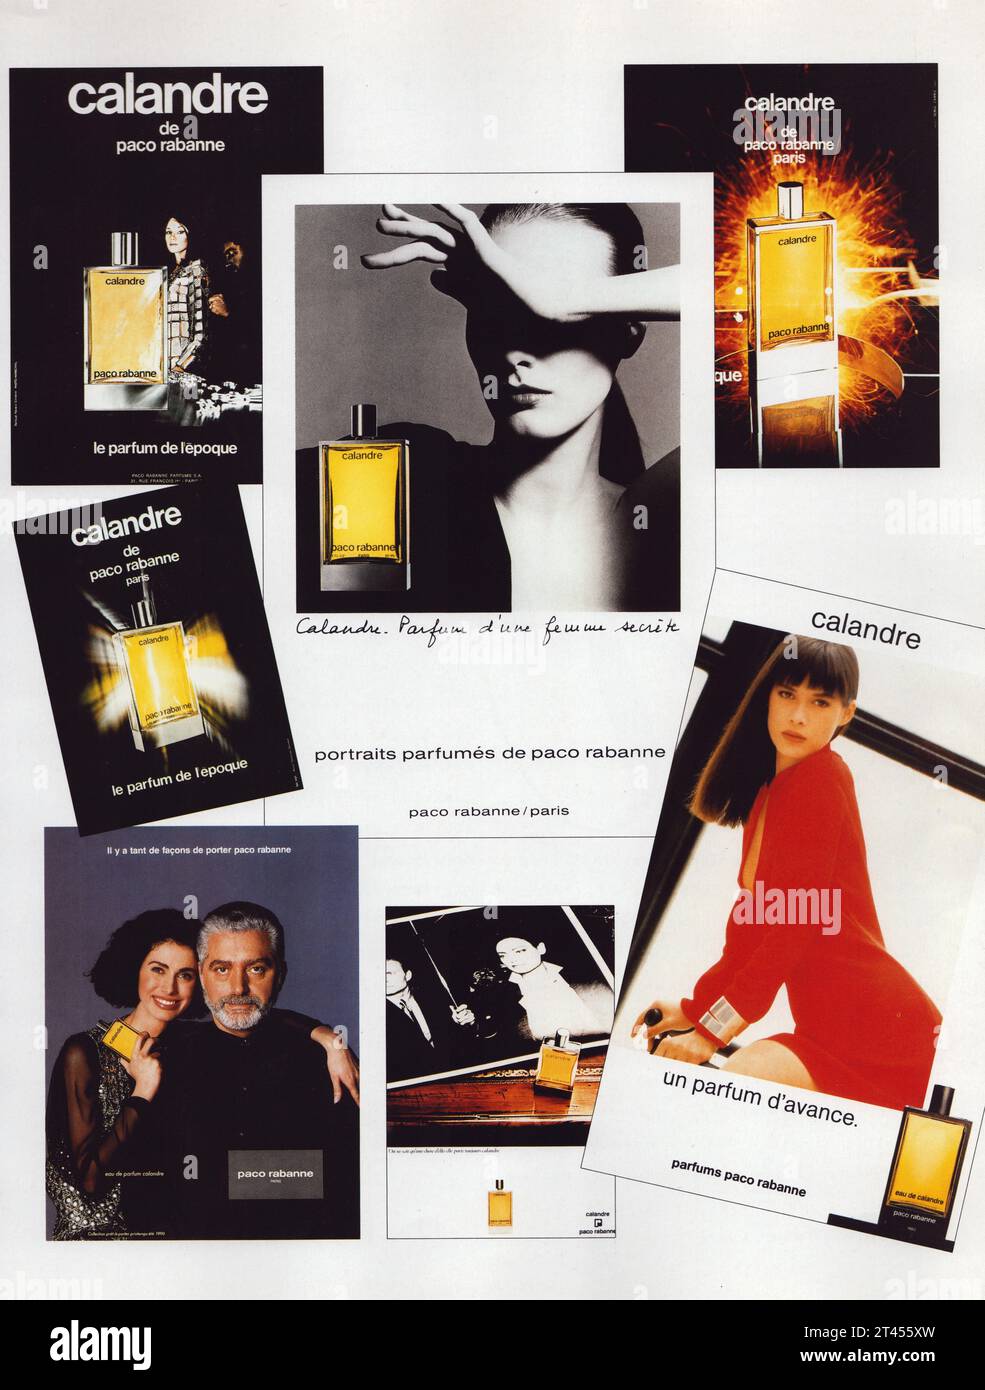 Calandre de Paco Rabanne affiche Parfums Paco Rabanne advertising posters, collage of Paco Rabanne vintage commercials Stock Photo